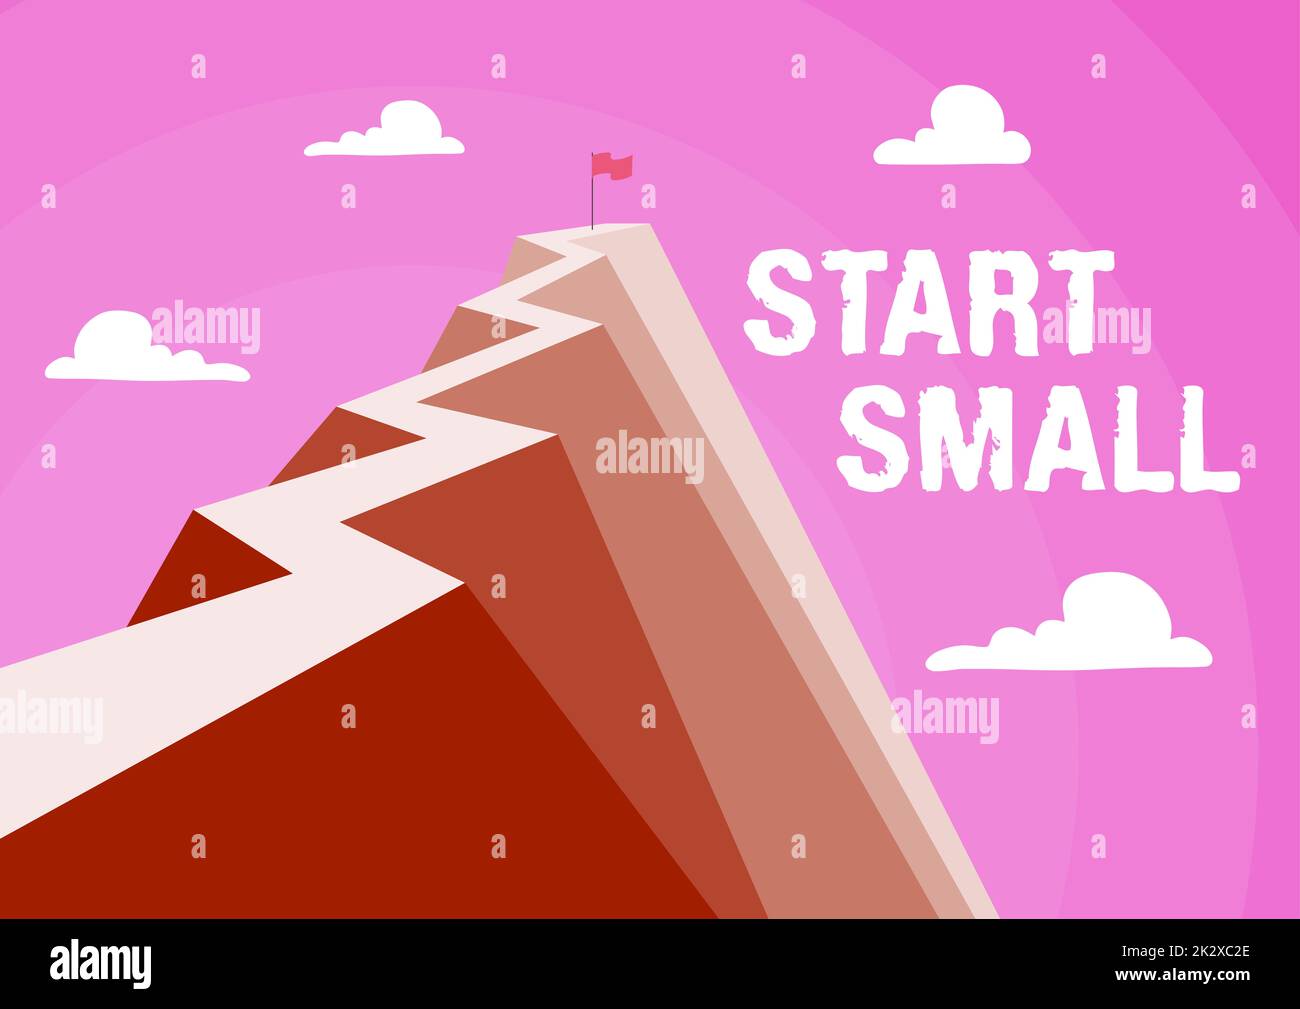 Text sign showing Start Small. Business idea Small medium enterprises start up Business entrepreneurship Mountain showing high road symbolizing reaching goals successfully. Stock Photo